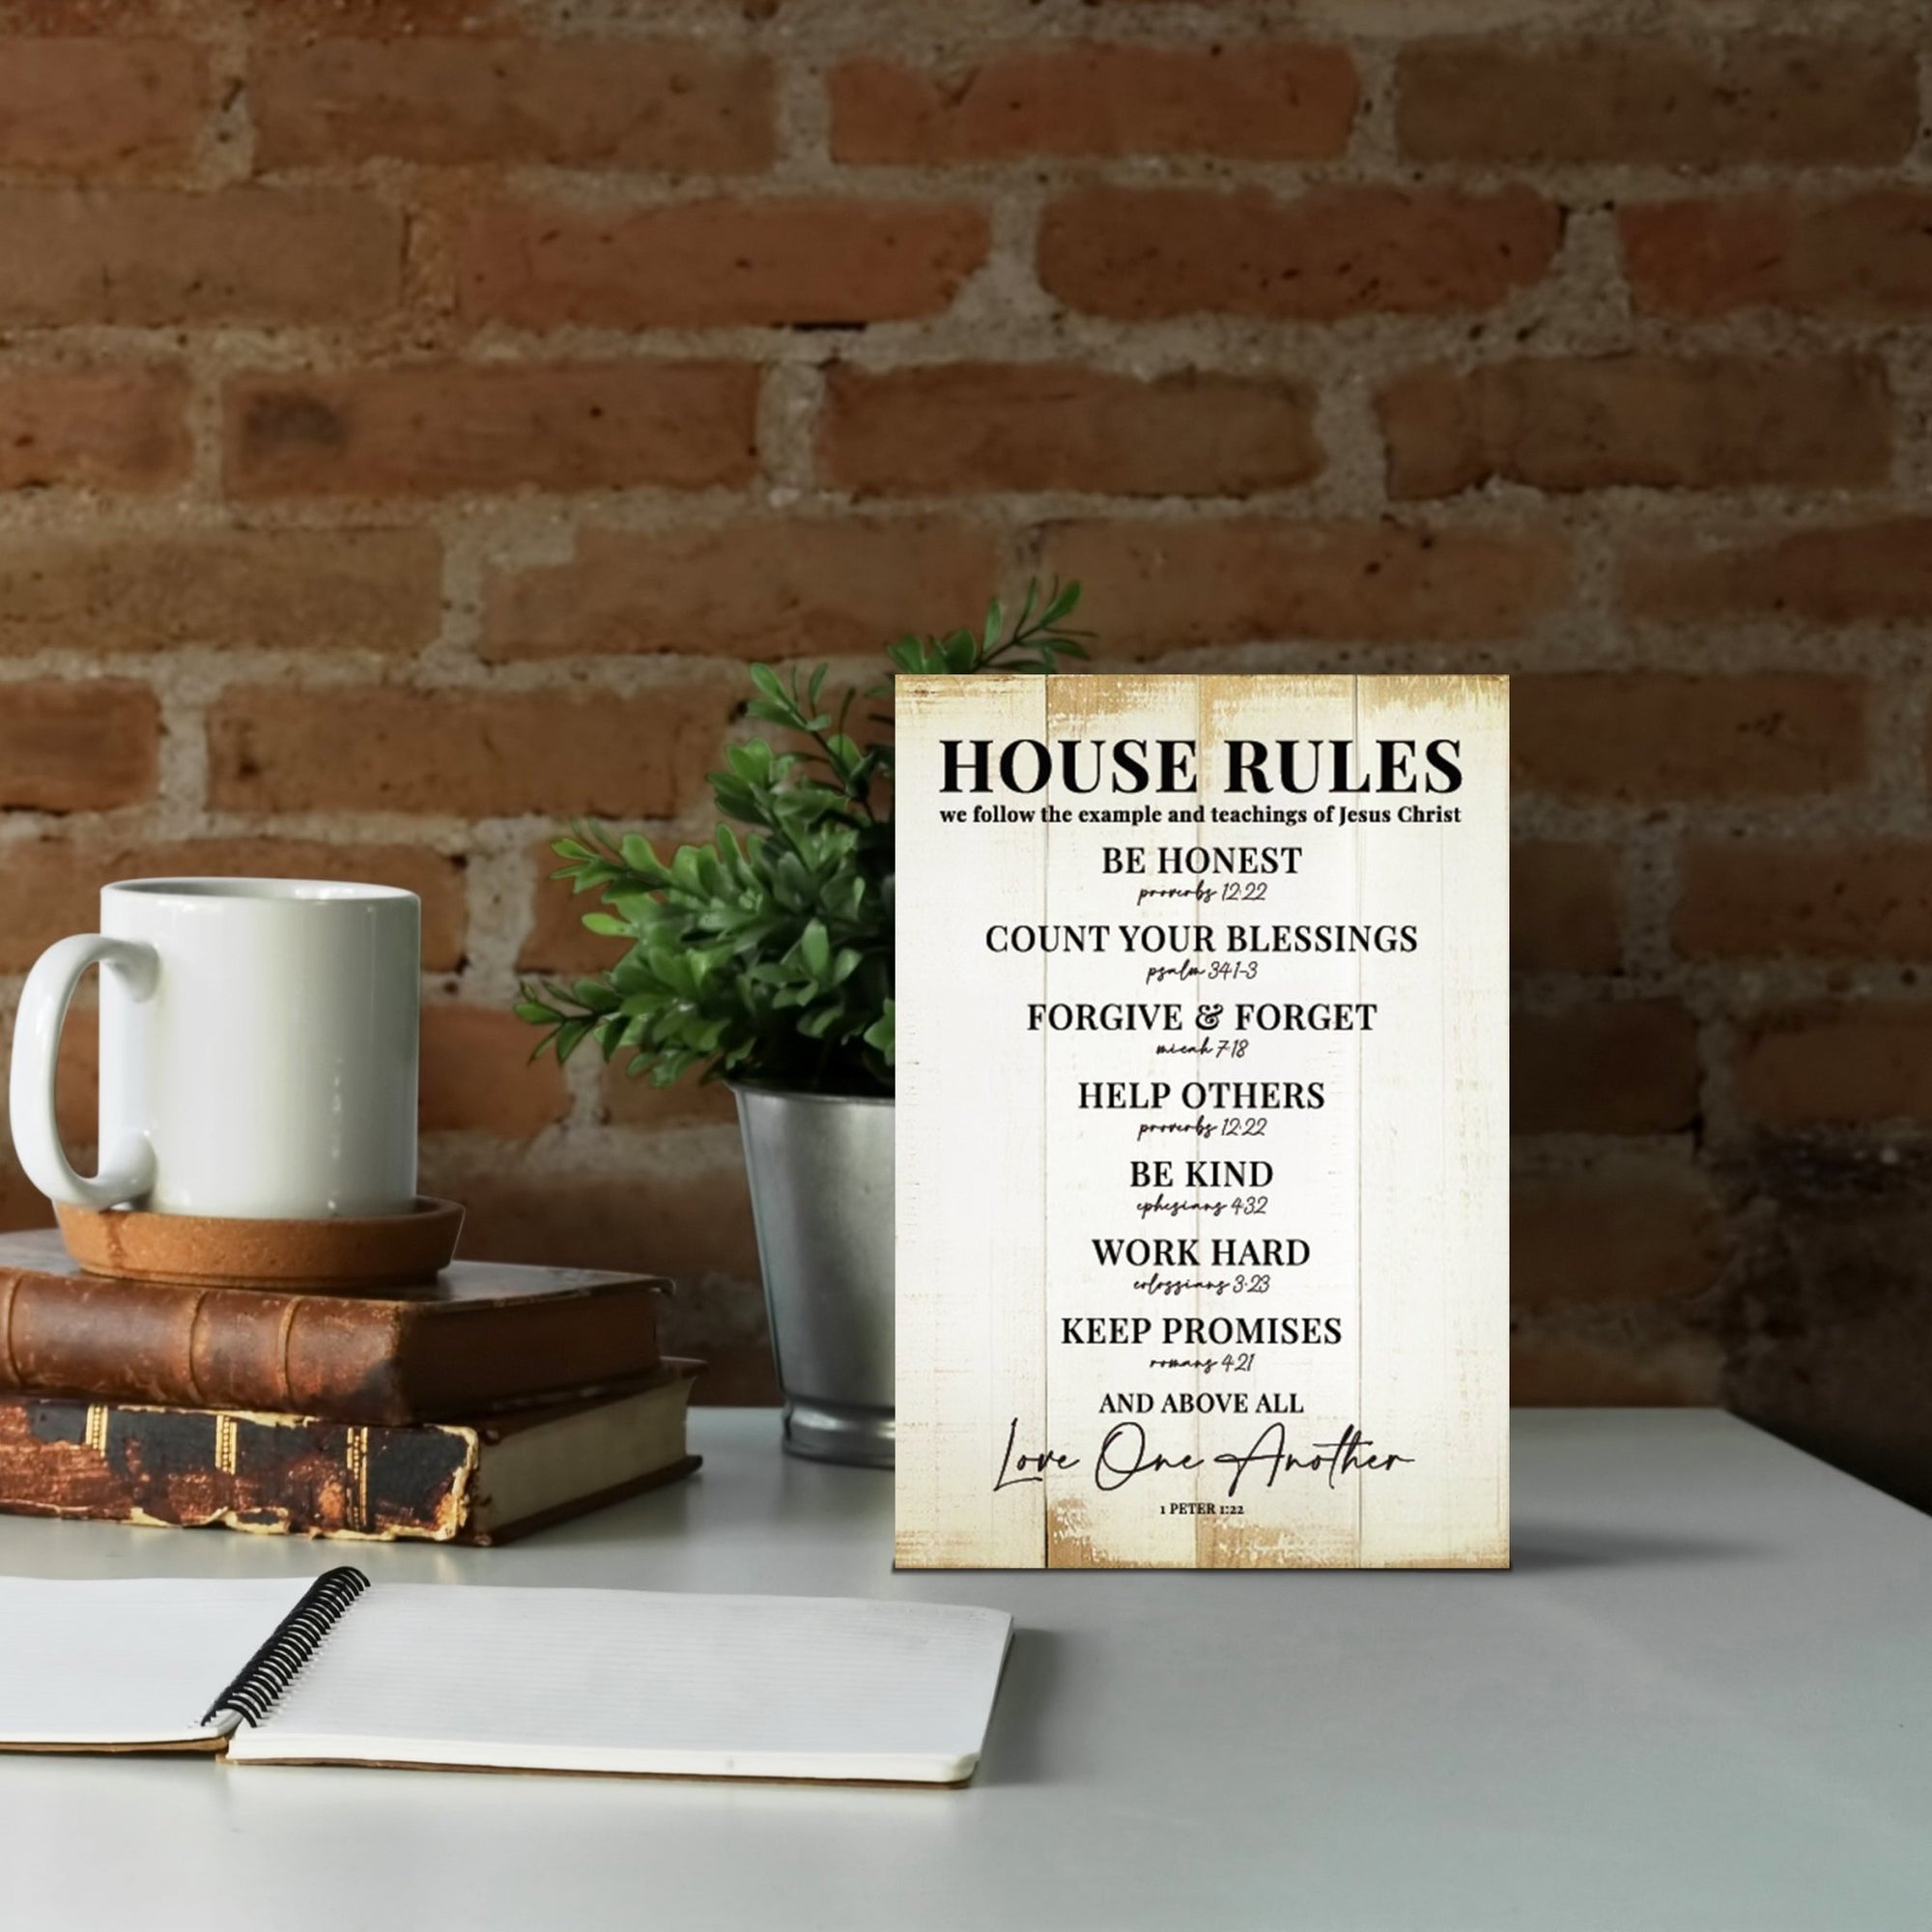 House Rules Vintage-Inspired Wooden Kitchen Shelf Décor For Housewarming Gift Ideas - LifeSong Milestones